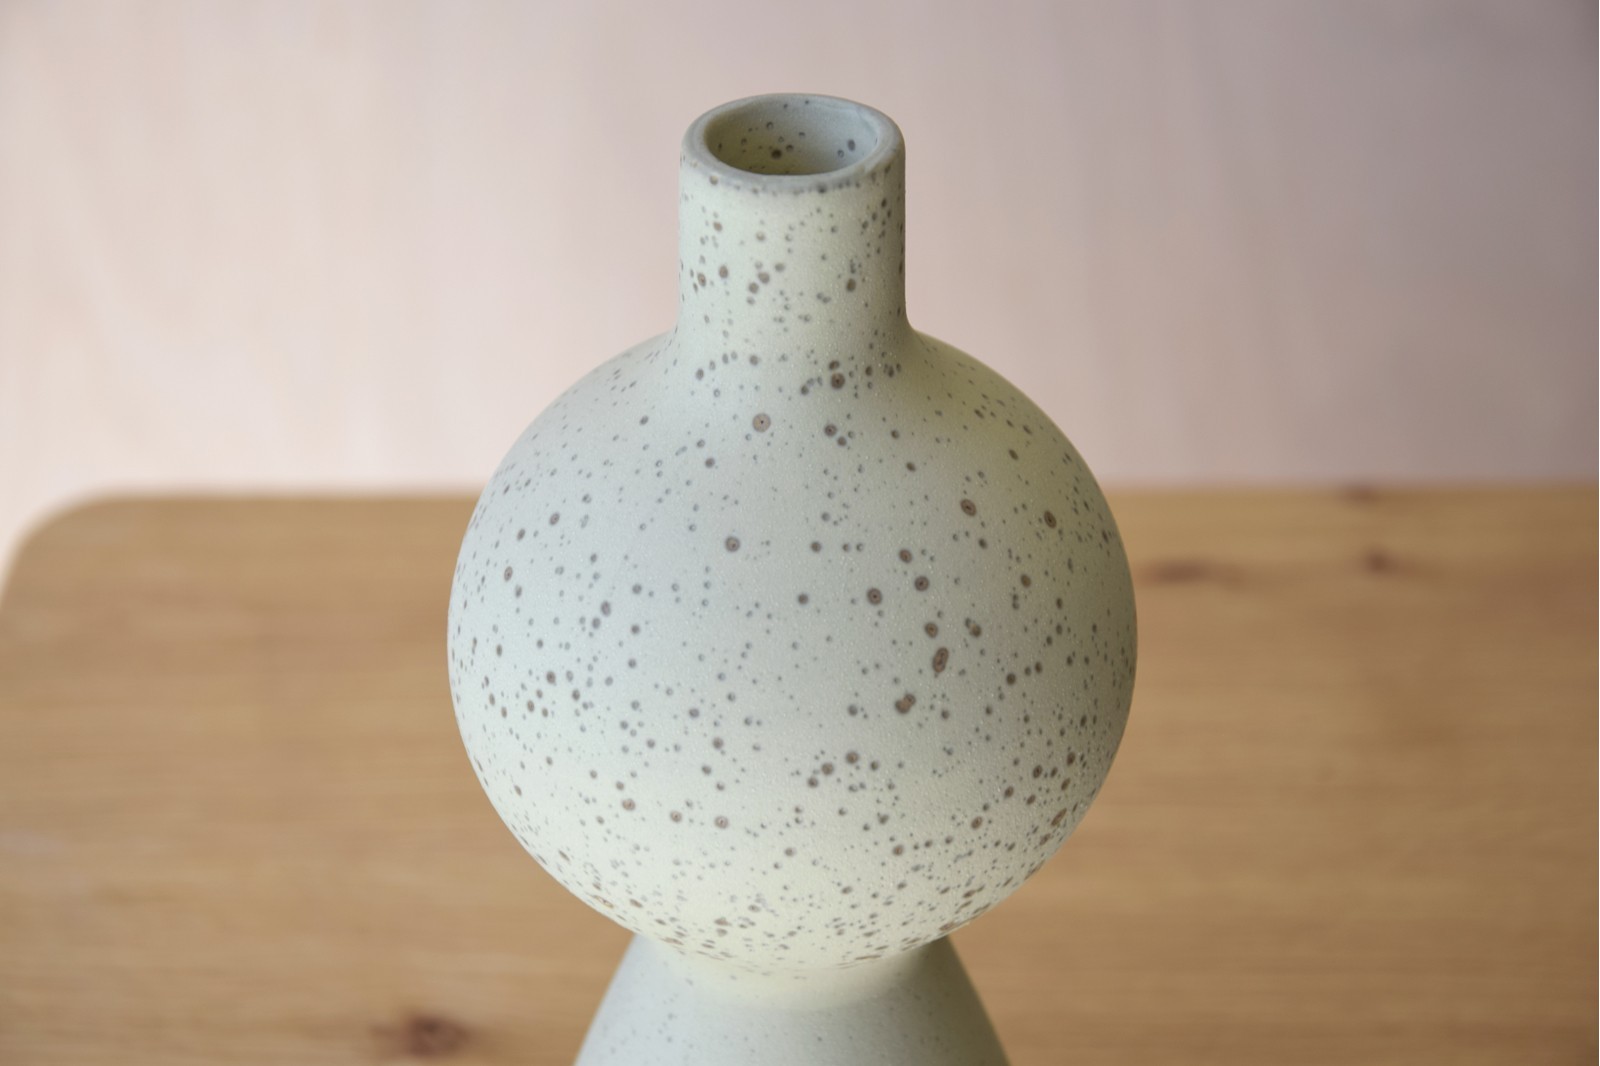 CERAMIC VASE. GREEN EARTH COLLECTION. SMALL